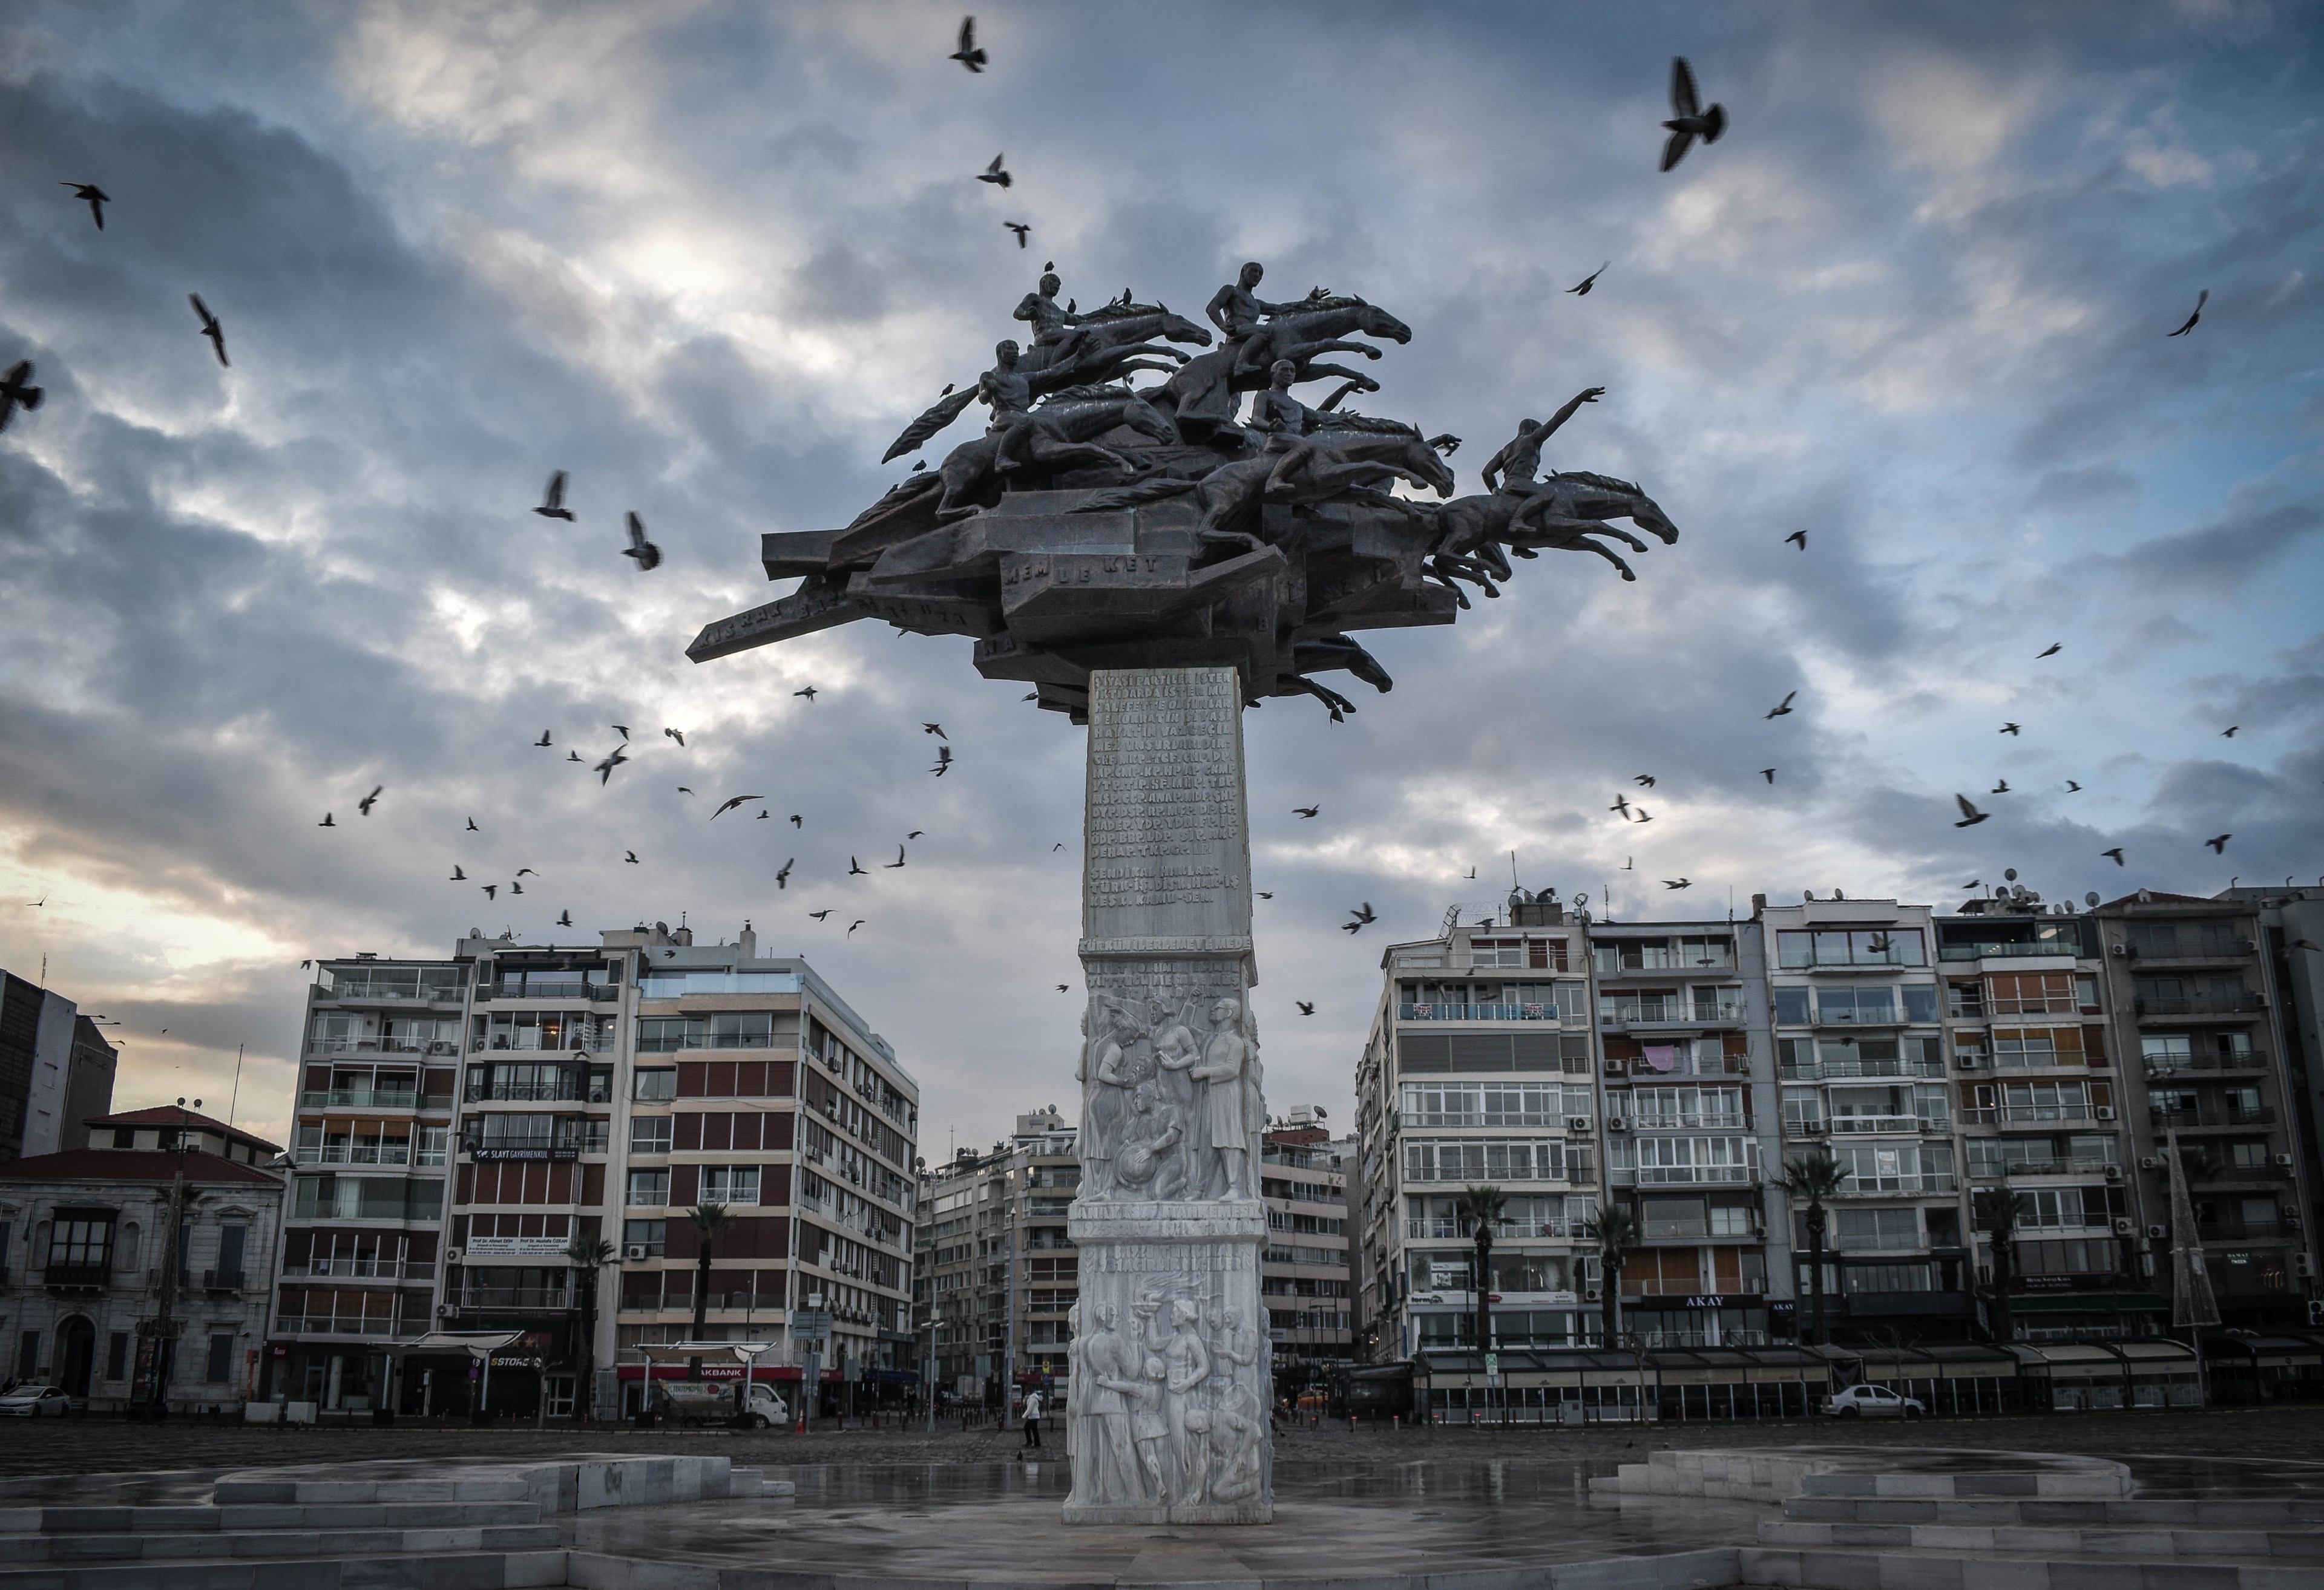 İzmir, one of the biggest cities in Turkey, is worth a visit, to experience nightlife, to eat   something special or to watch flying  birds along the coast.  